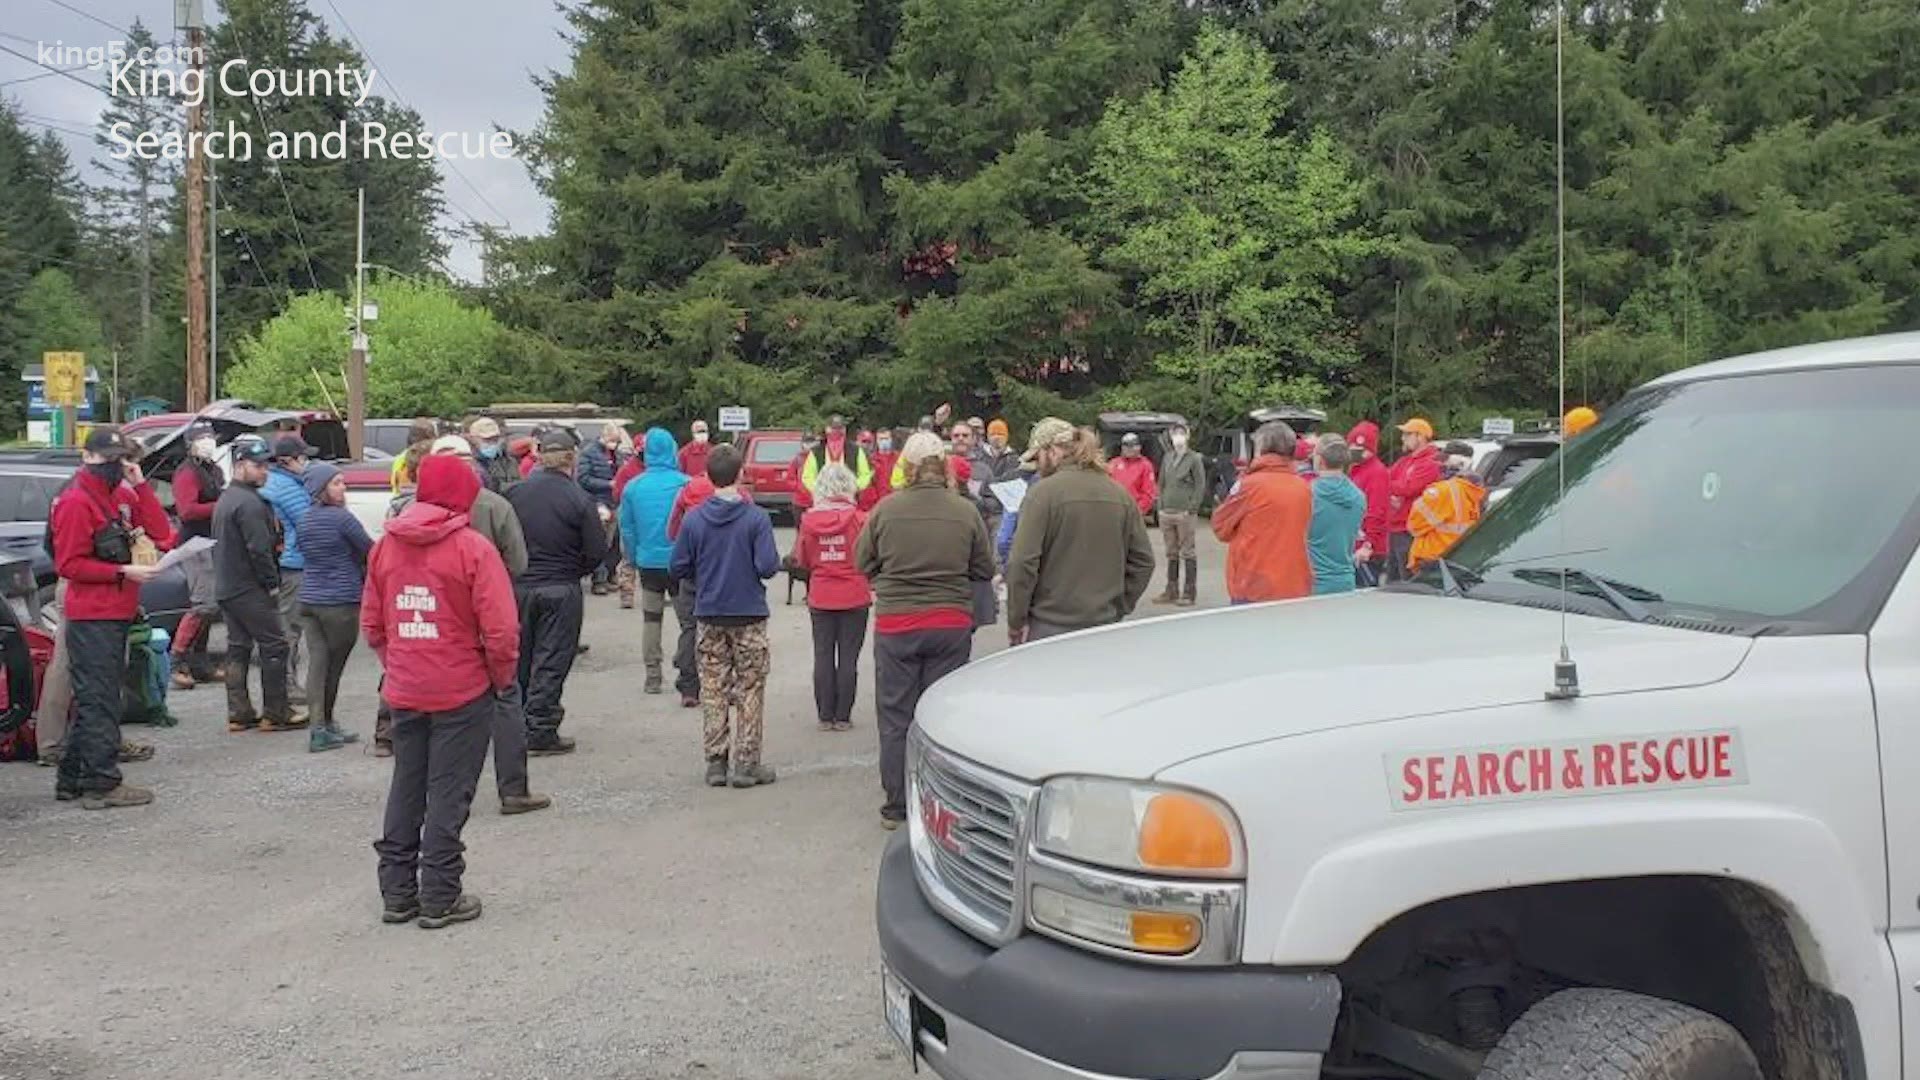 With hiking one of the few activities allowed under pandemic restrictions, the King County SAR president says that has translated to more rescues than ever before.